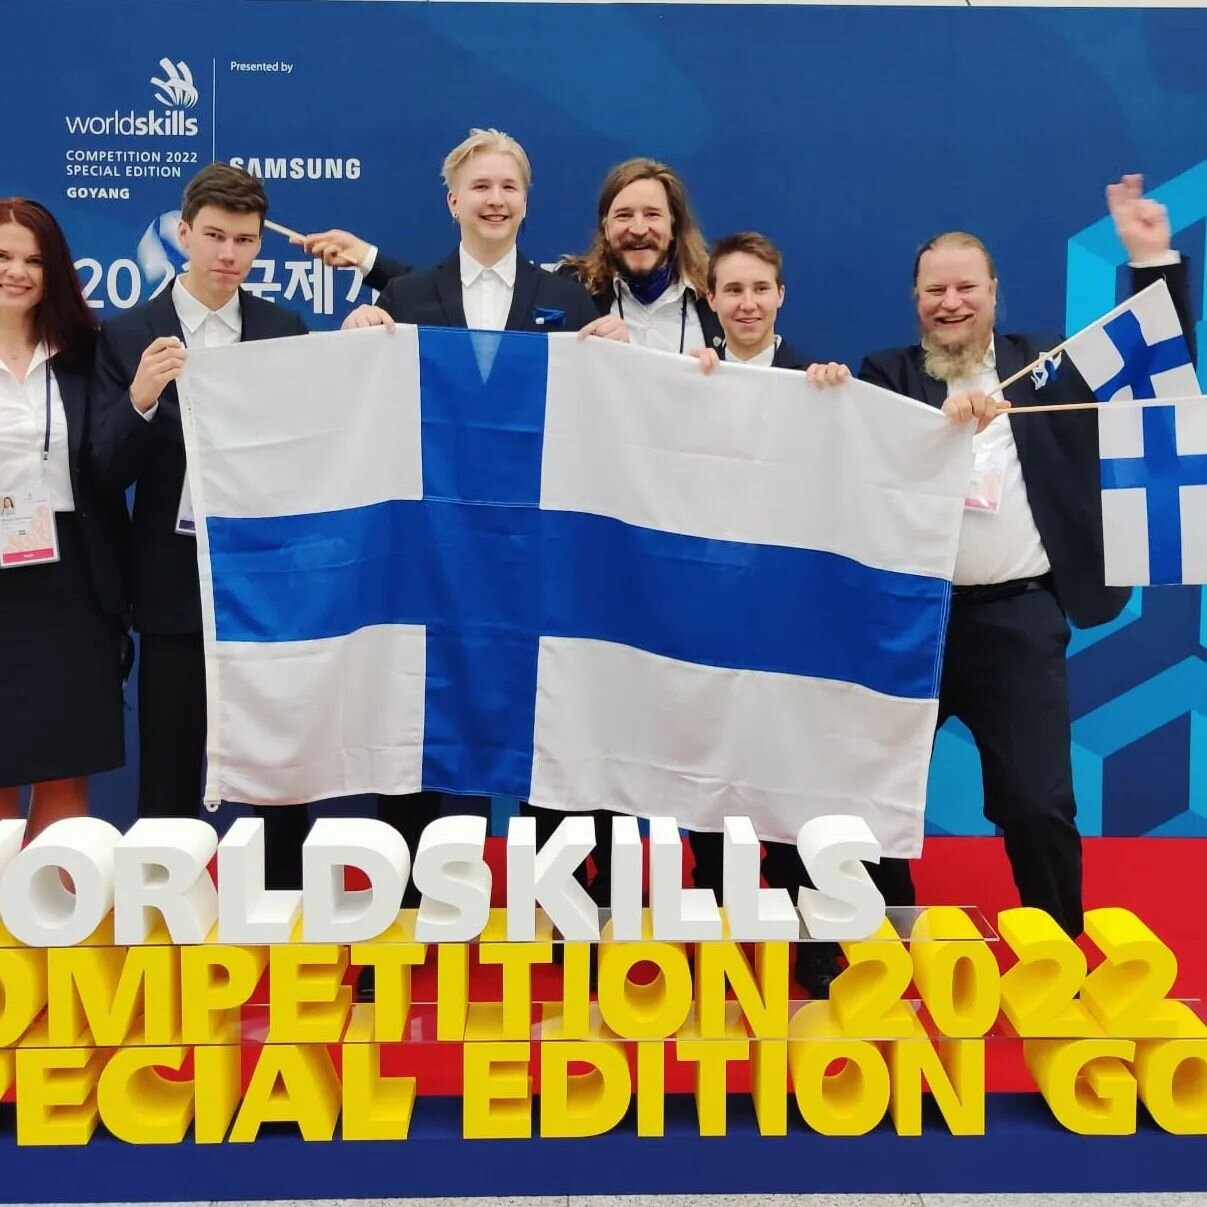 I spent last week in WorldSkills Competition in Goyang, Korea 🍁🍁🇰🇷
I worked there as an Expert (coach/referee) in the skill 3D Game Art. The young contestants did their best in the 4 day competition and Korea gave it's best with amazing arrangeme